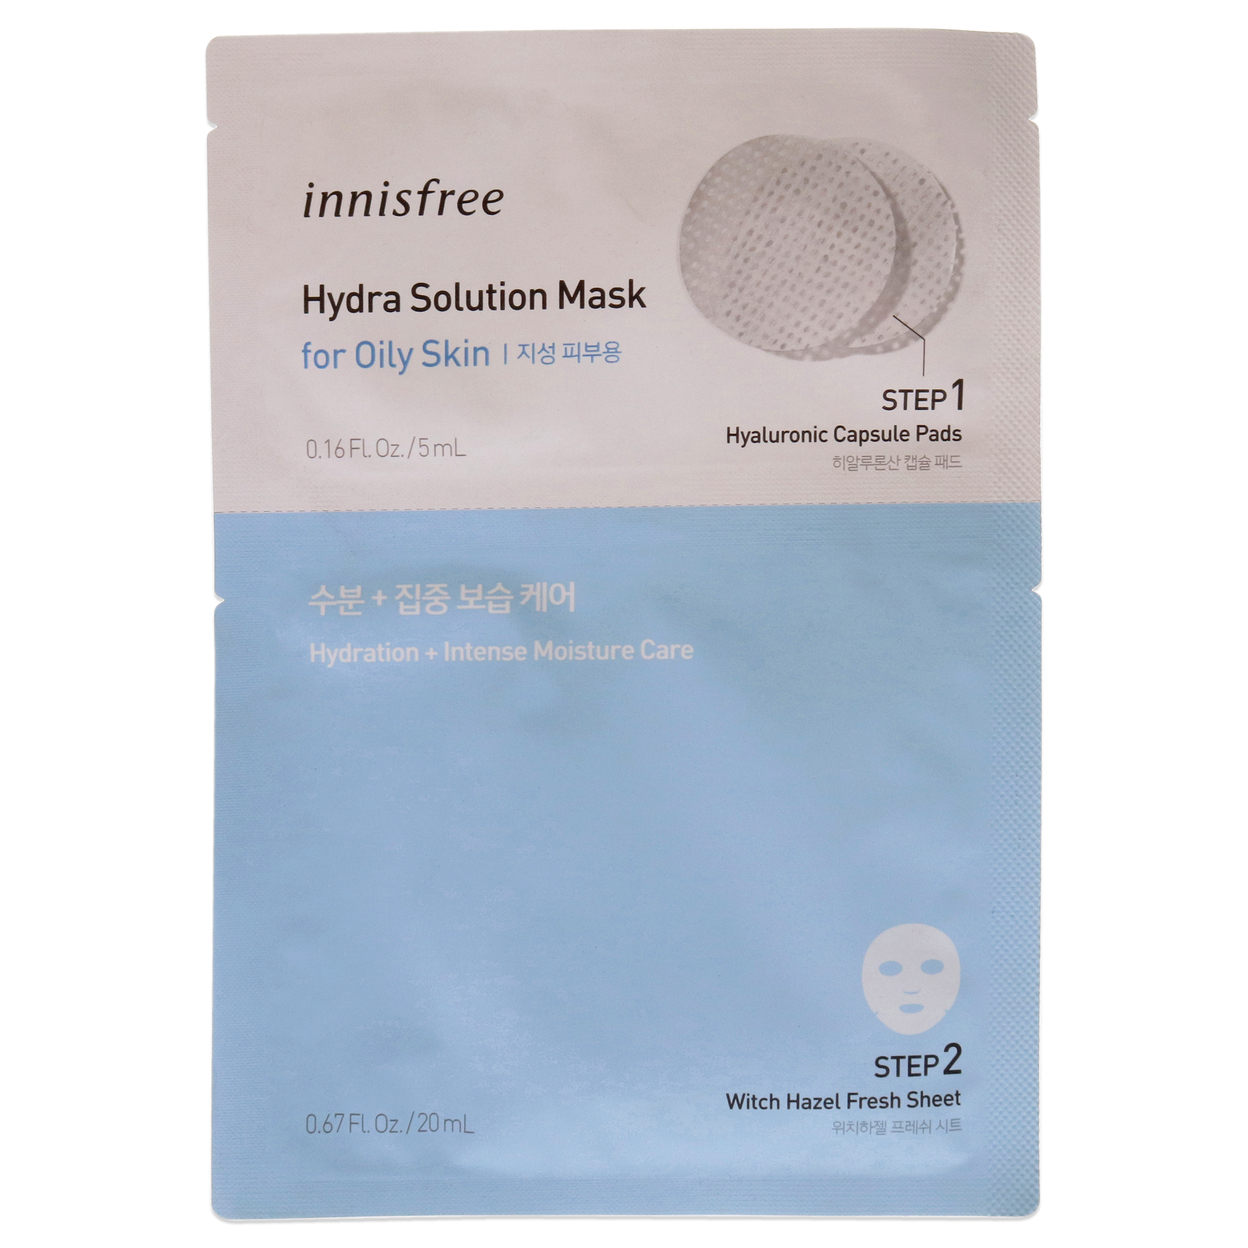 Innisfree Hydra Solution Mask 0.16oz Step 1 Hyalurinic Capsule Pads, 0.67oz Step 2 Witch Hazel Fresh Sheet Pads 1 Pc Kit